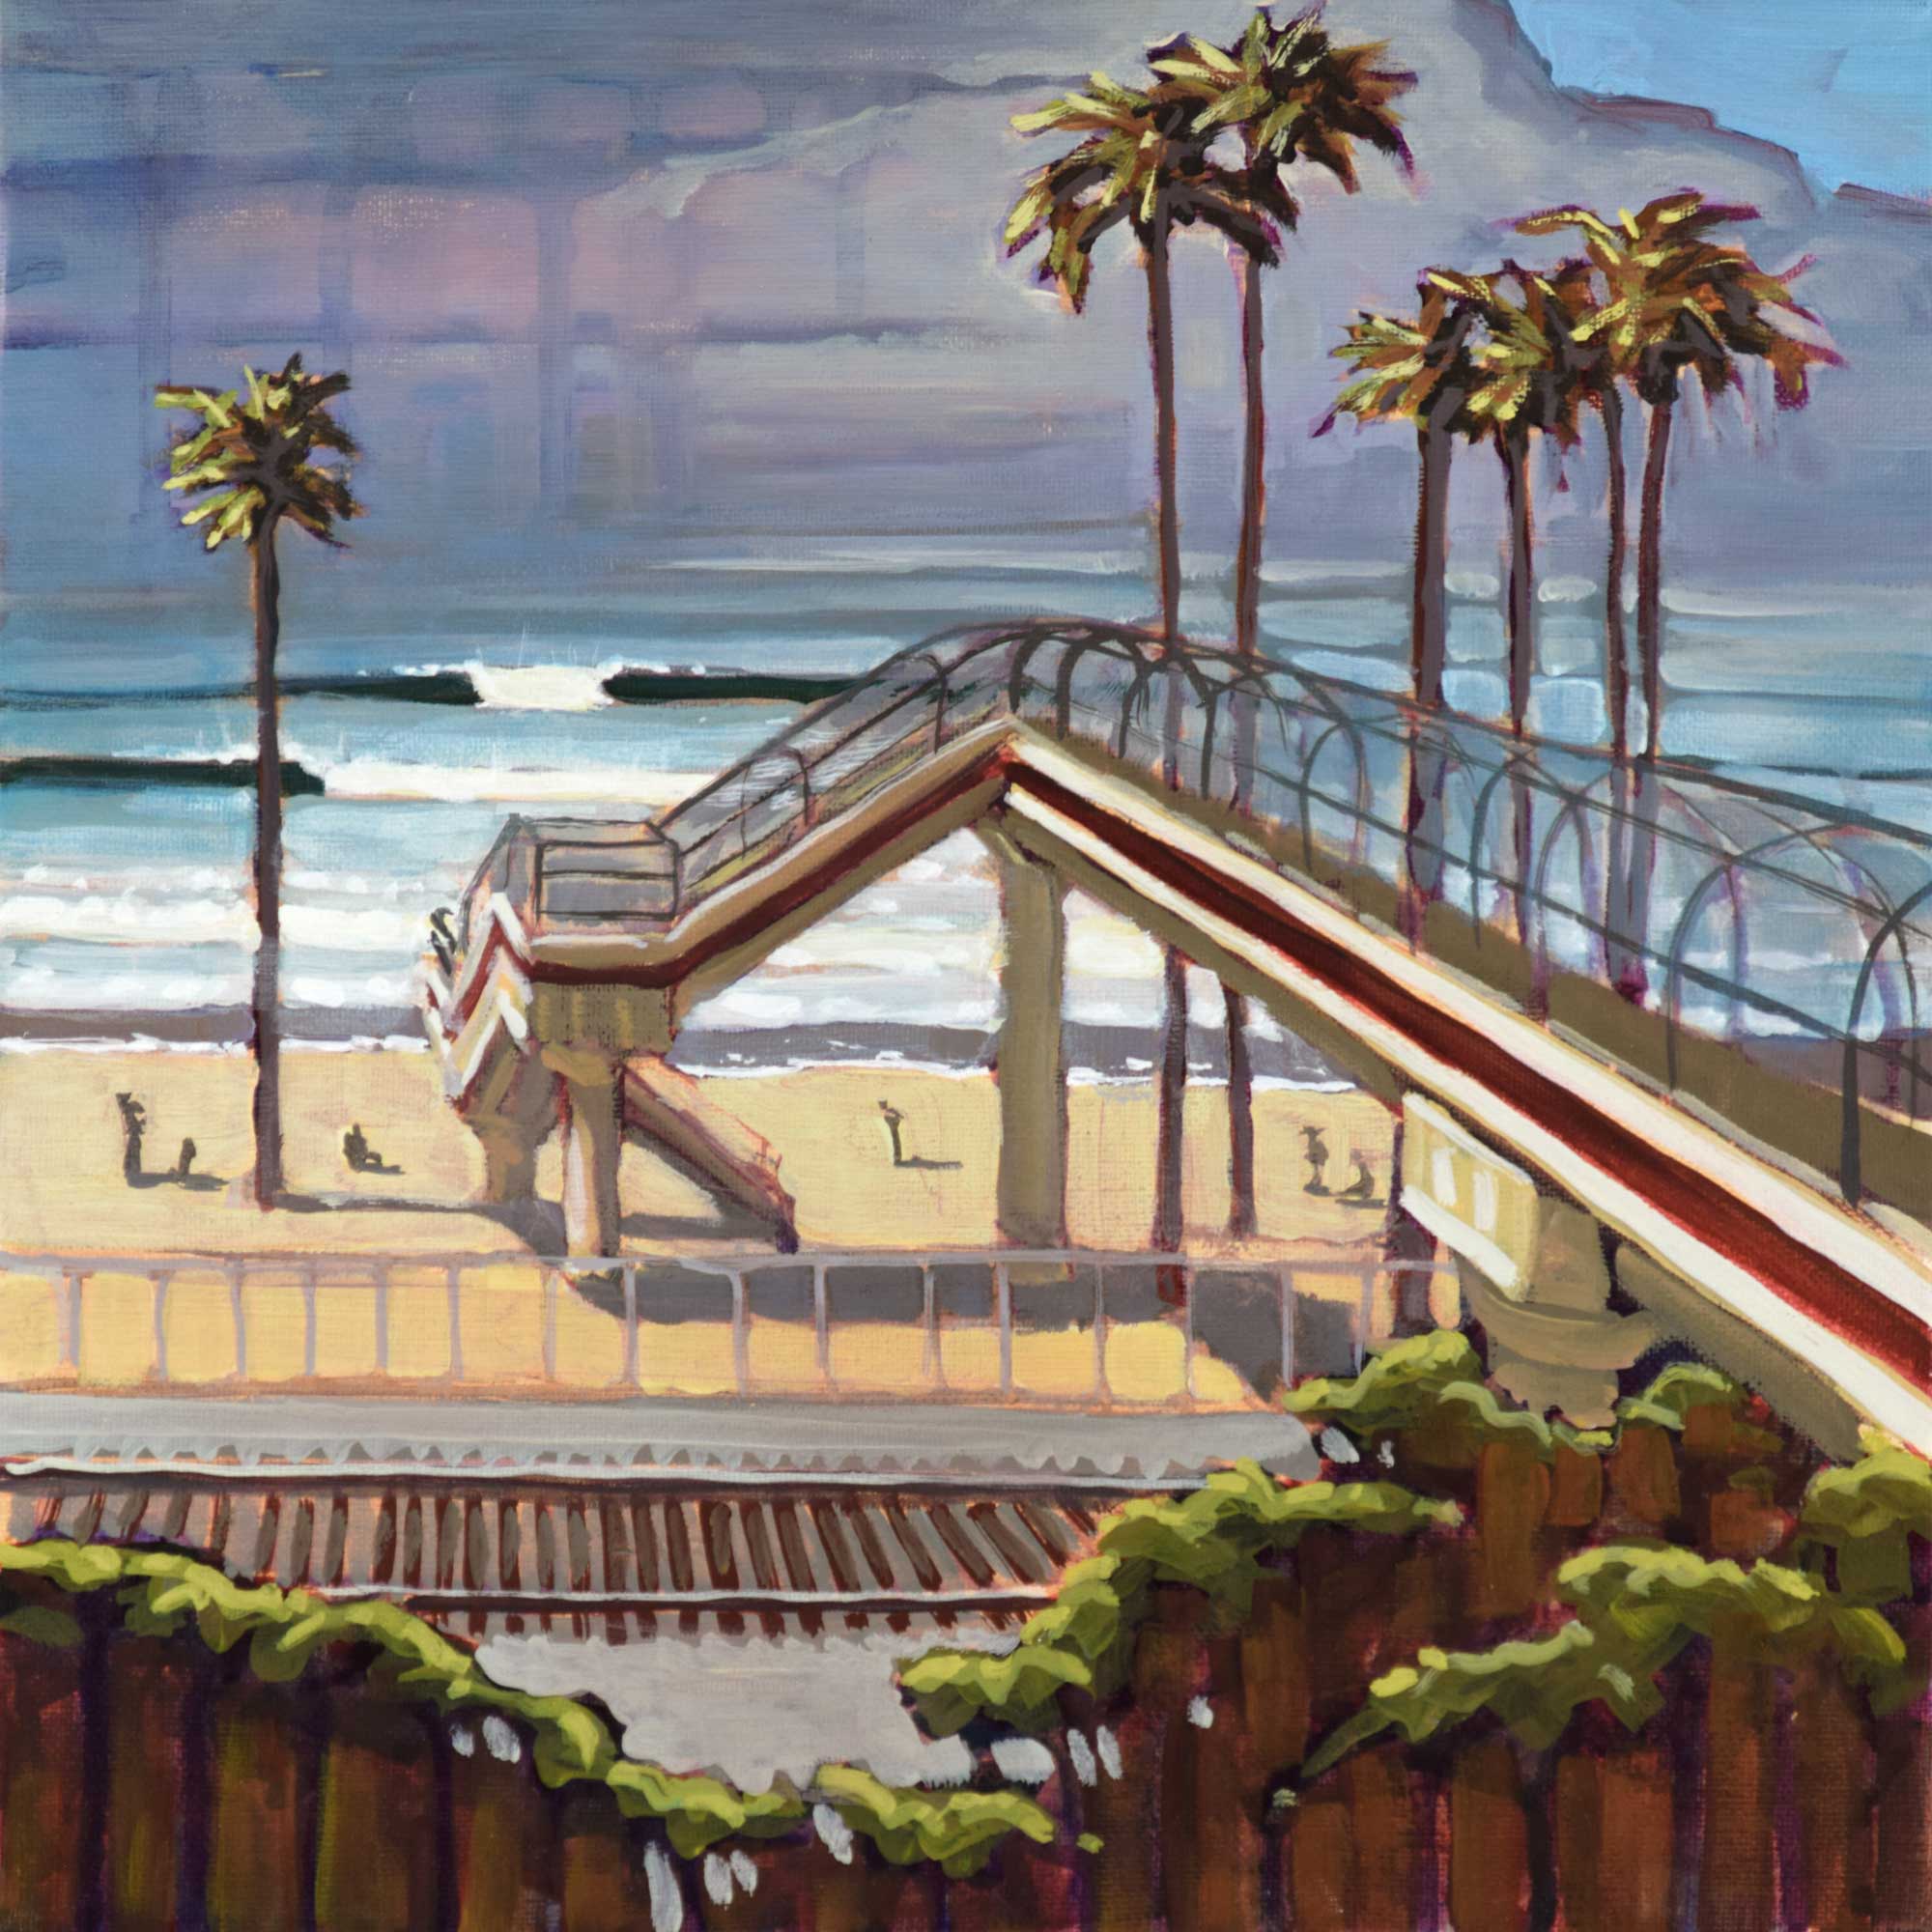 Plein air artwork of the pedestrian overpass at T Street on the Orange County coast of Southern California